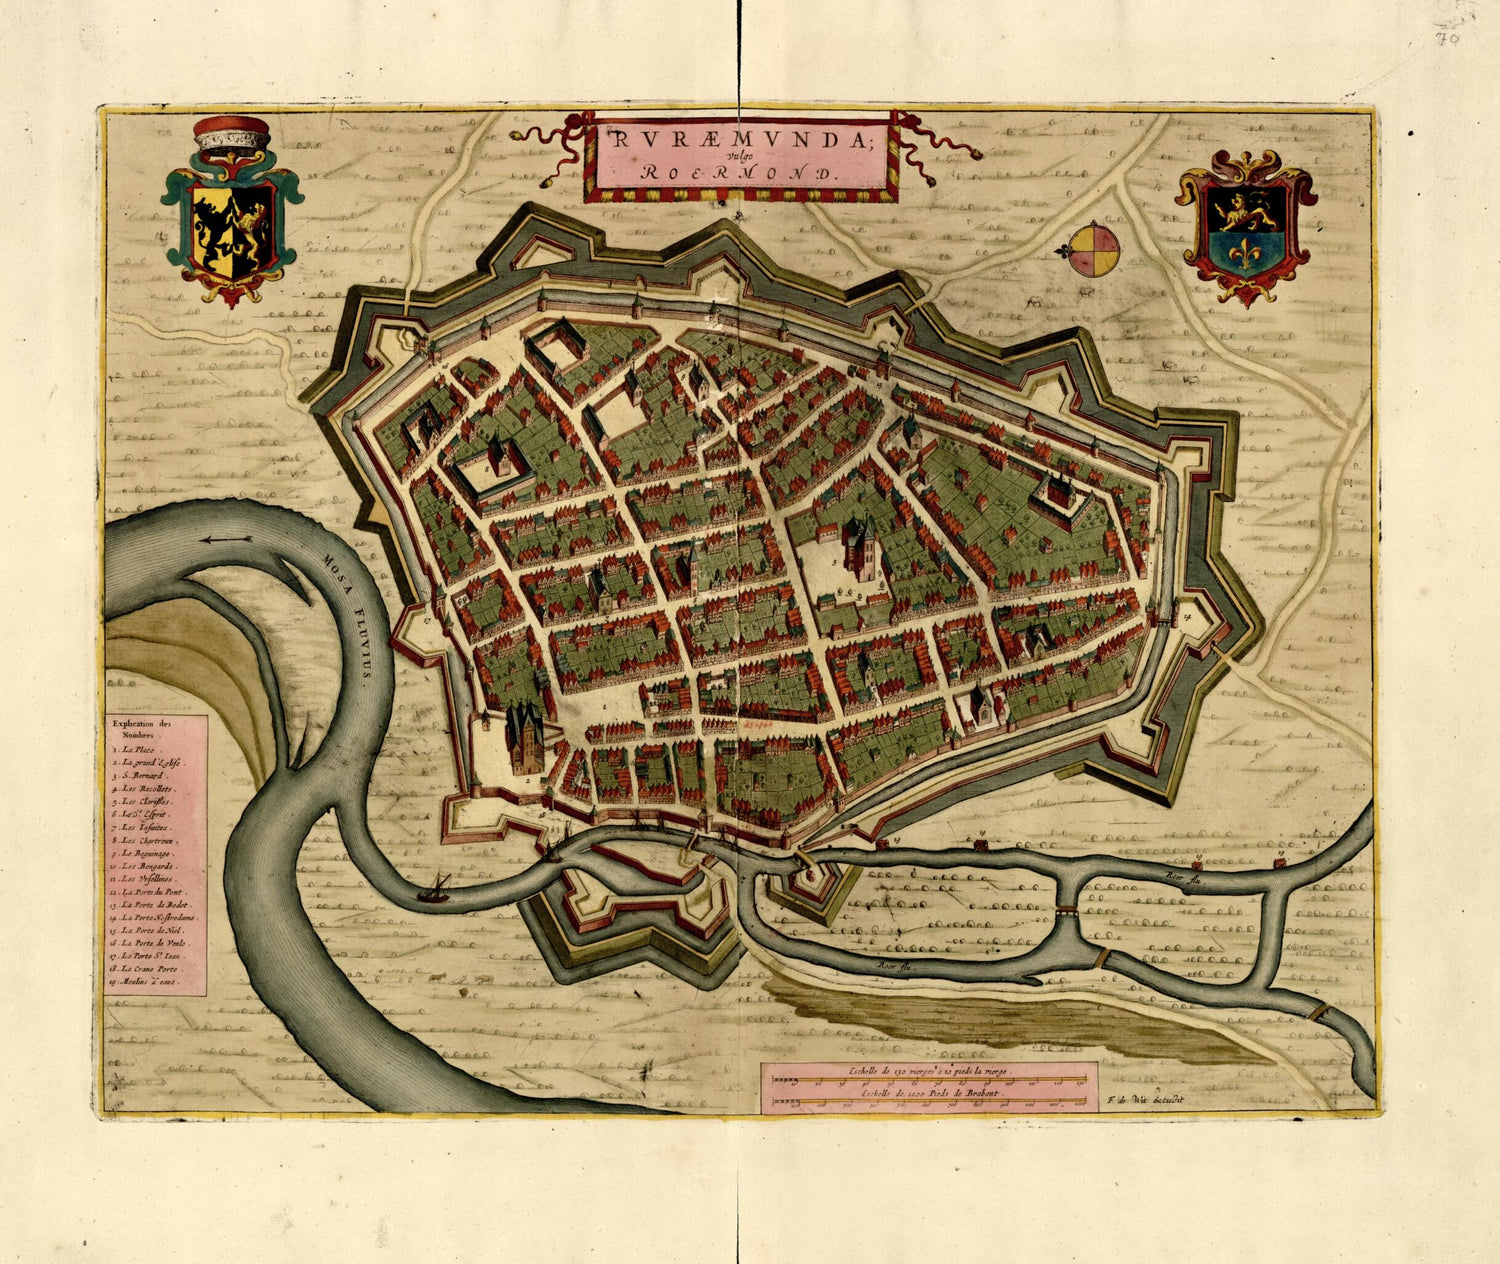 This old map of Rvraemvnda Vulgo Roermond from a Collection of Plans of Fortifications and Battles, 1684-from 1709 from 1709 was created by Anna Beeck in 1709